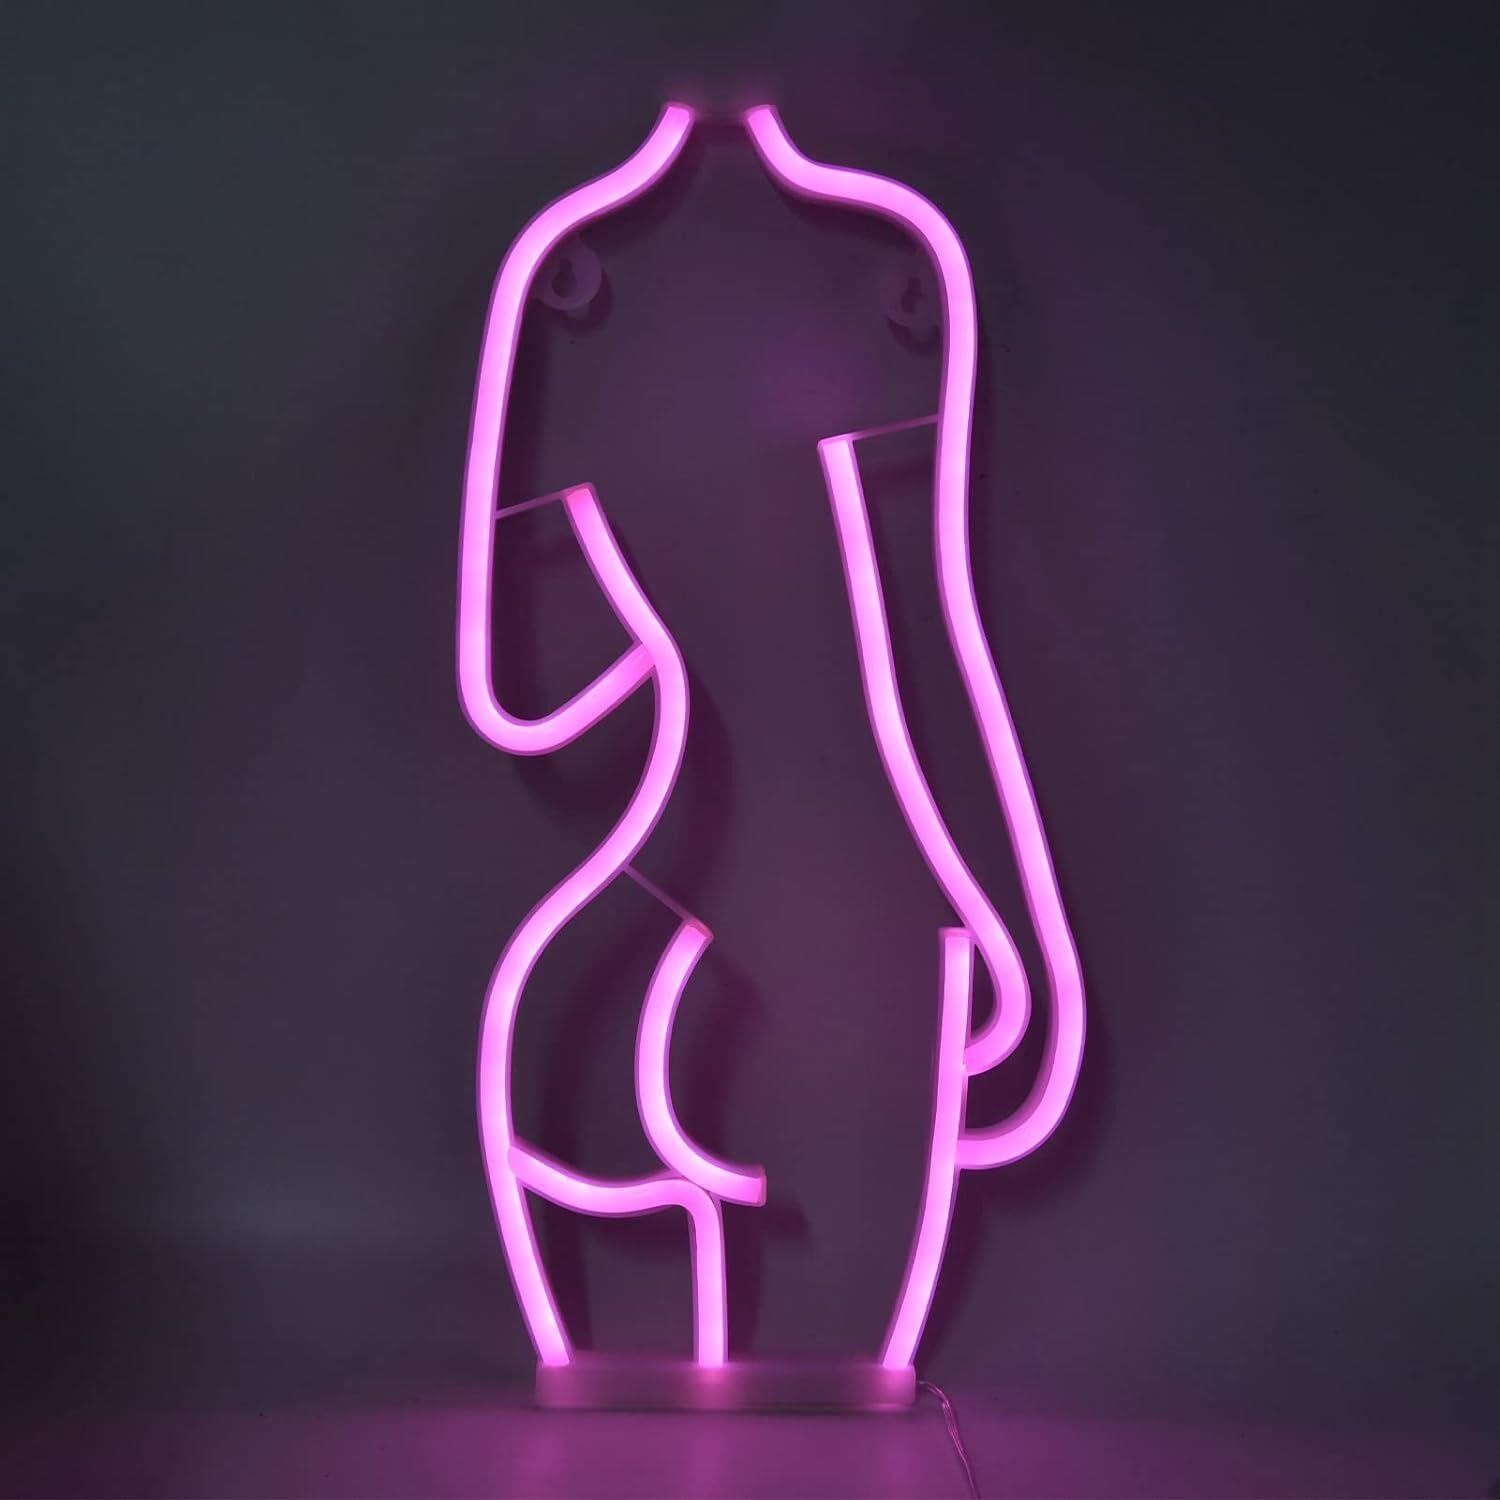 LED Lady Neon Sign  7.7x16.5in  Pink Decor